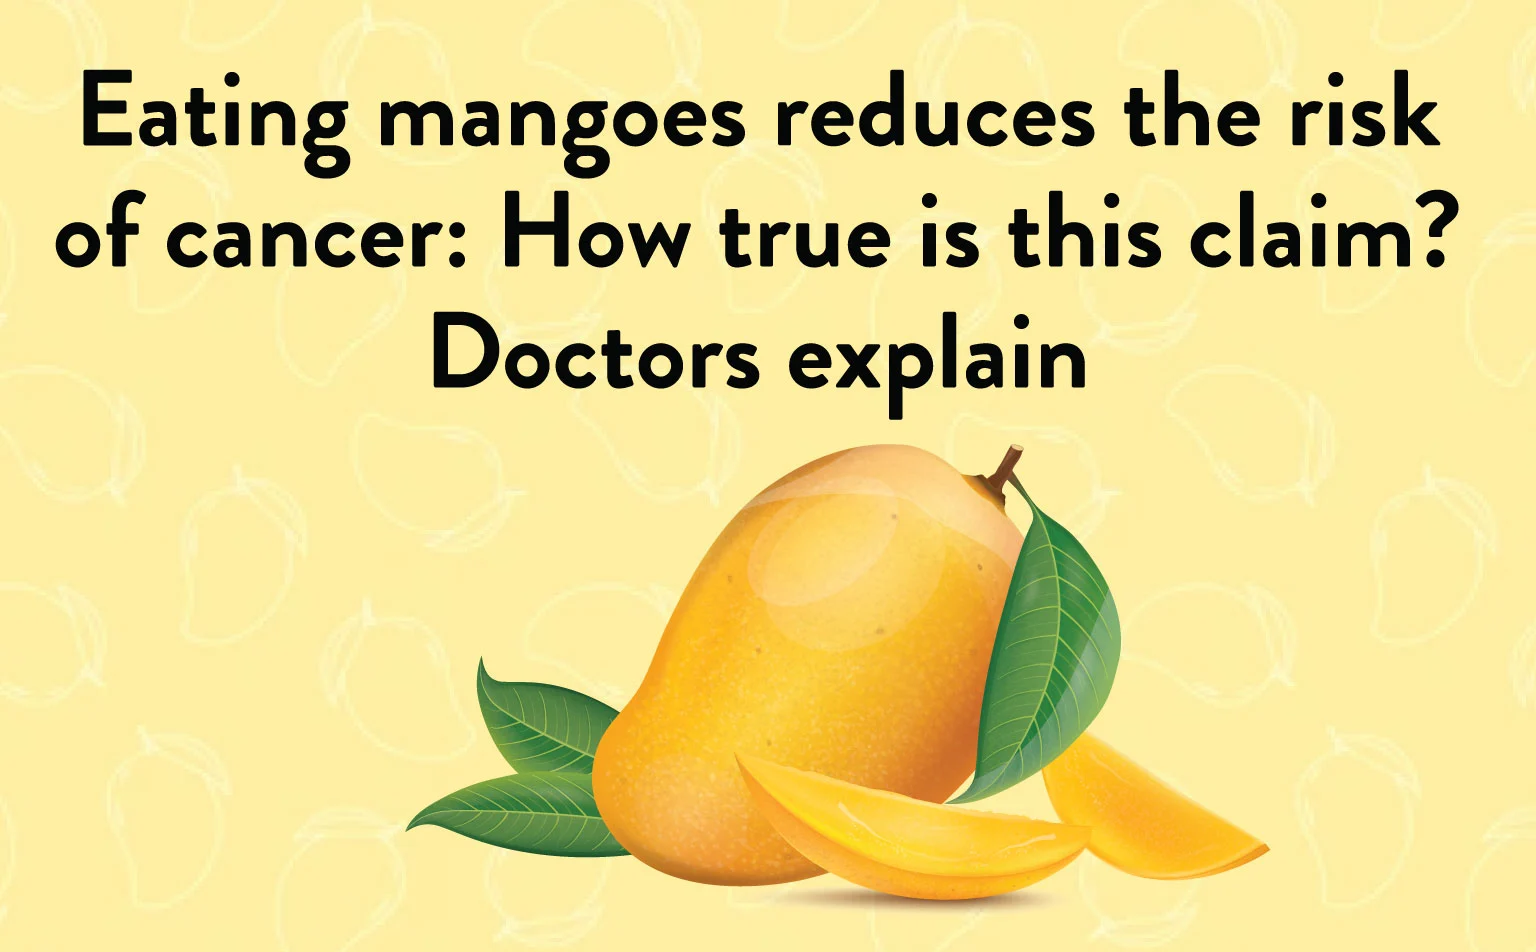 Mangoes and Cancer Risk: Doctor’s Insight